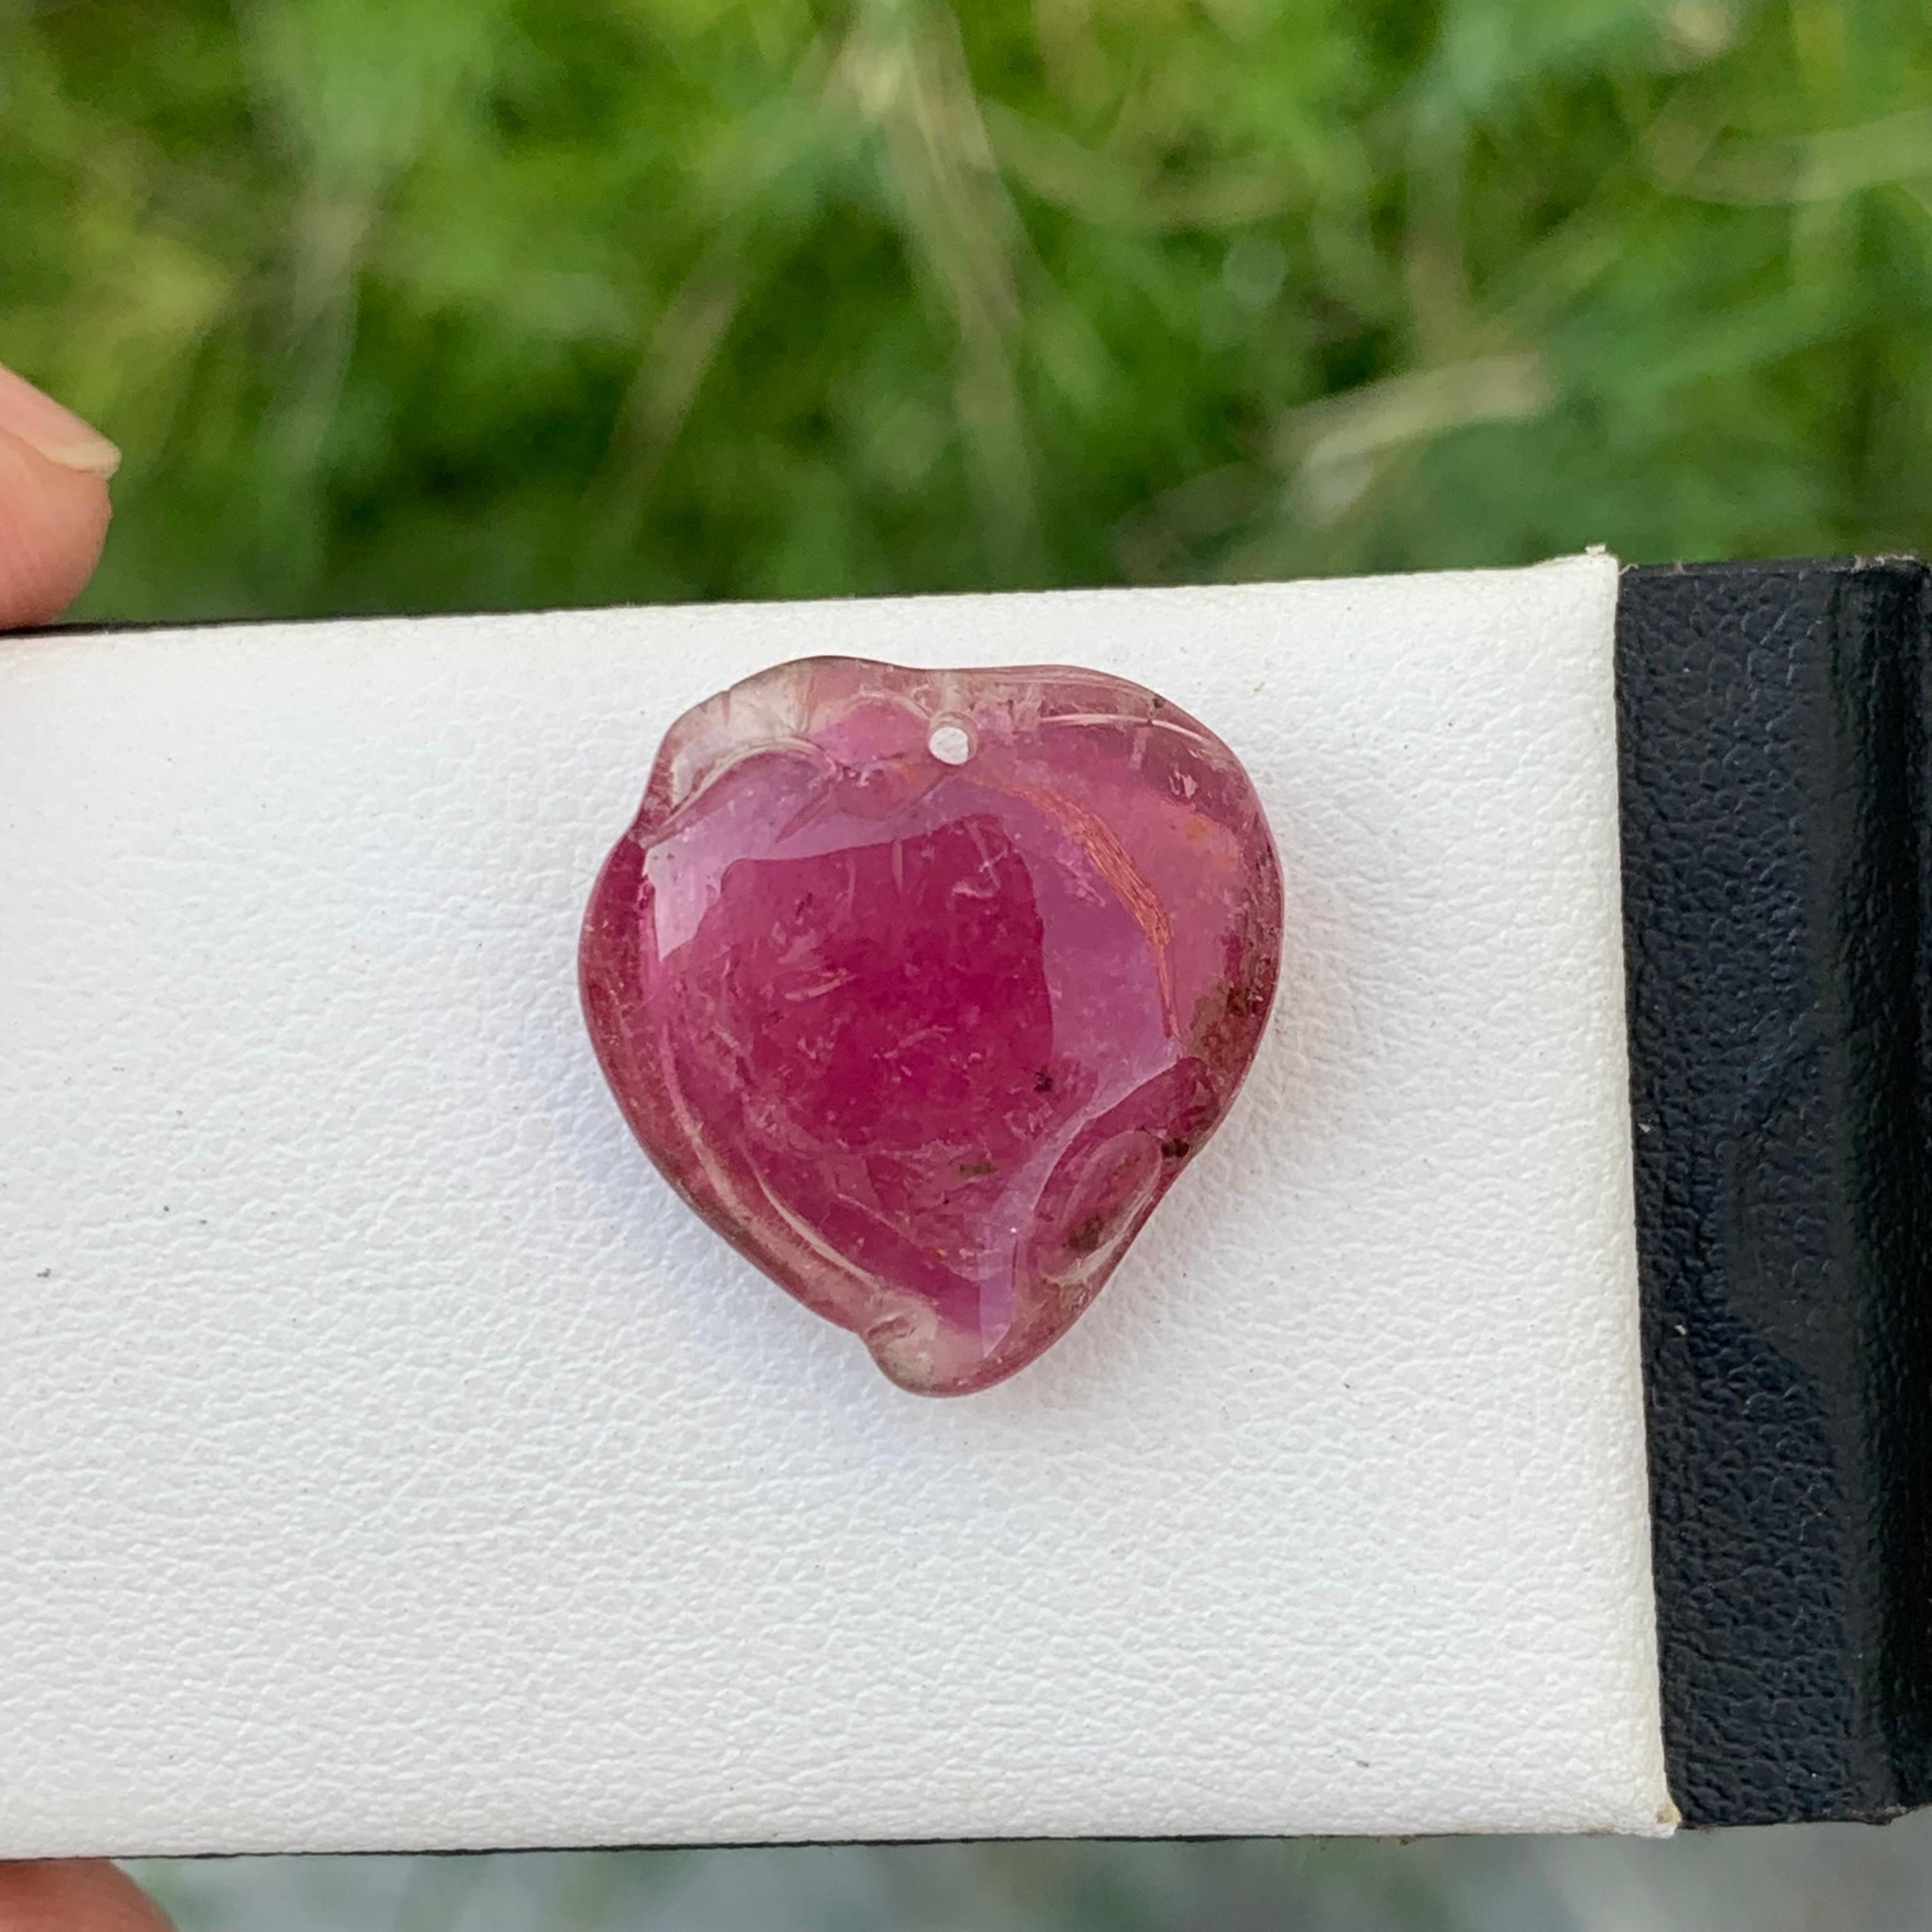 Crystal 14.65 Carat Loose Heart Shape Tourmaline Drilled Carving from Africa For Sale